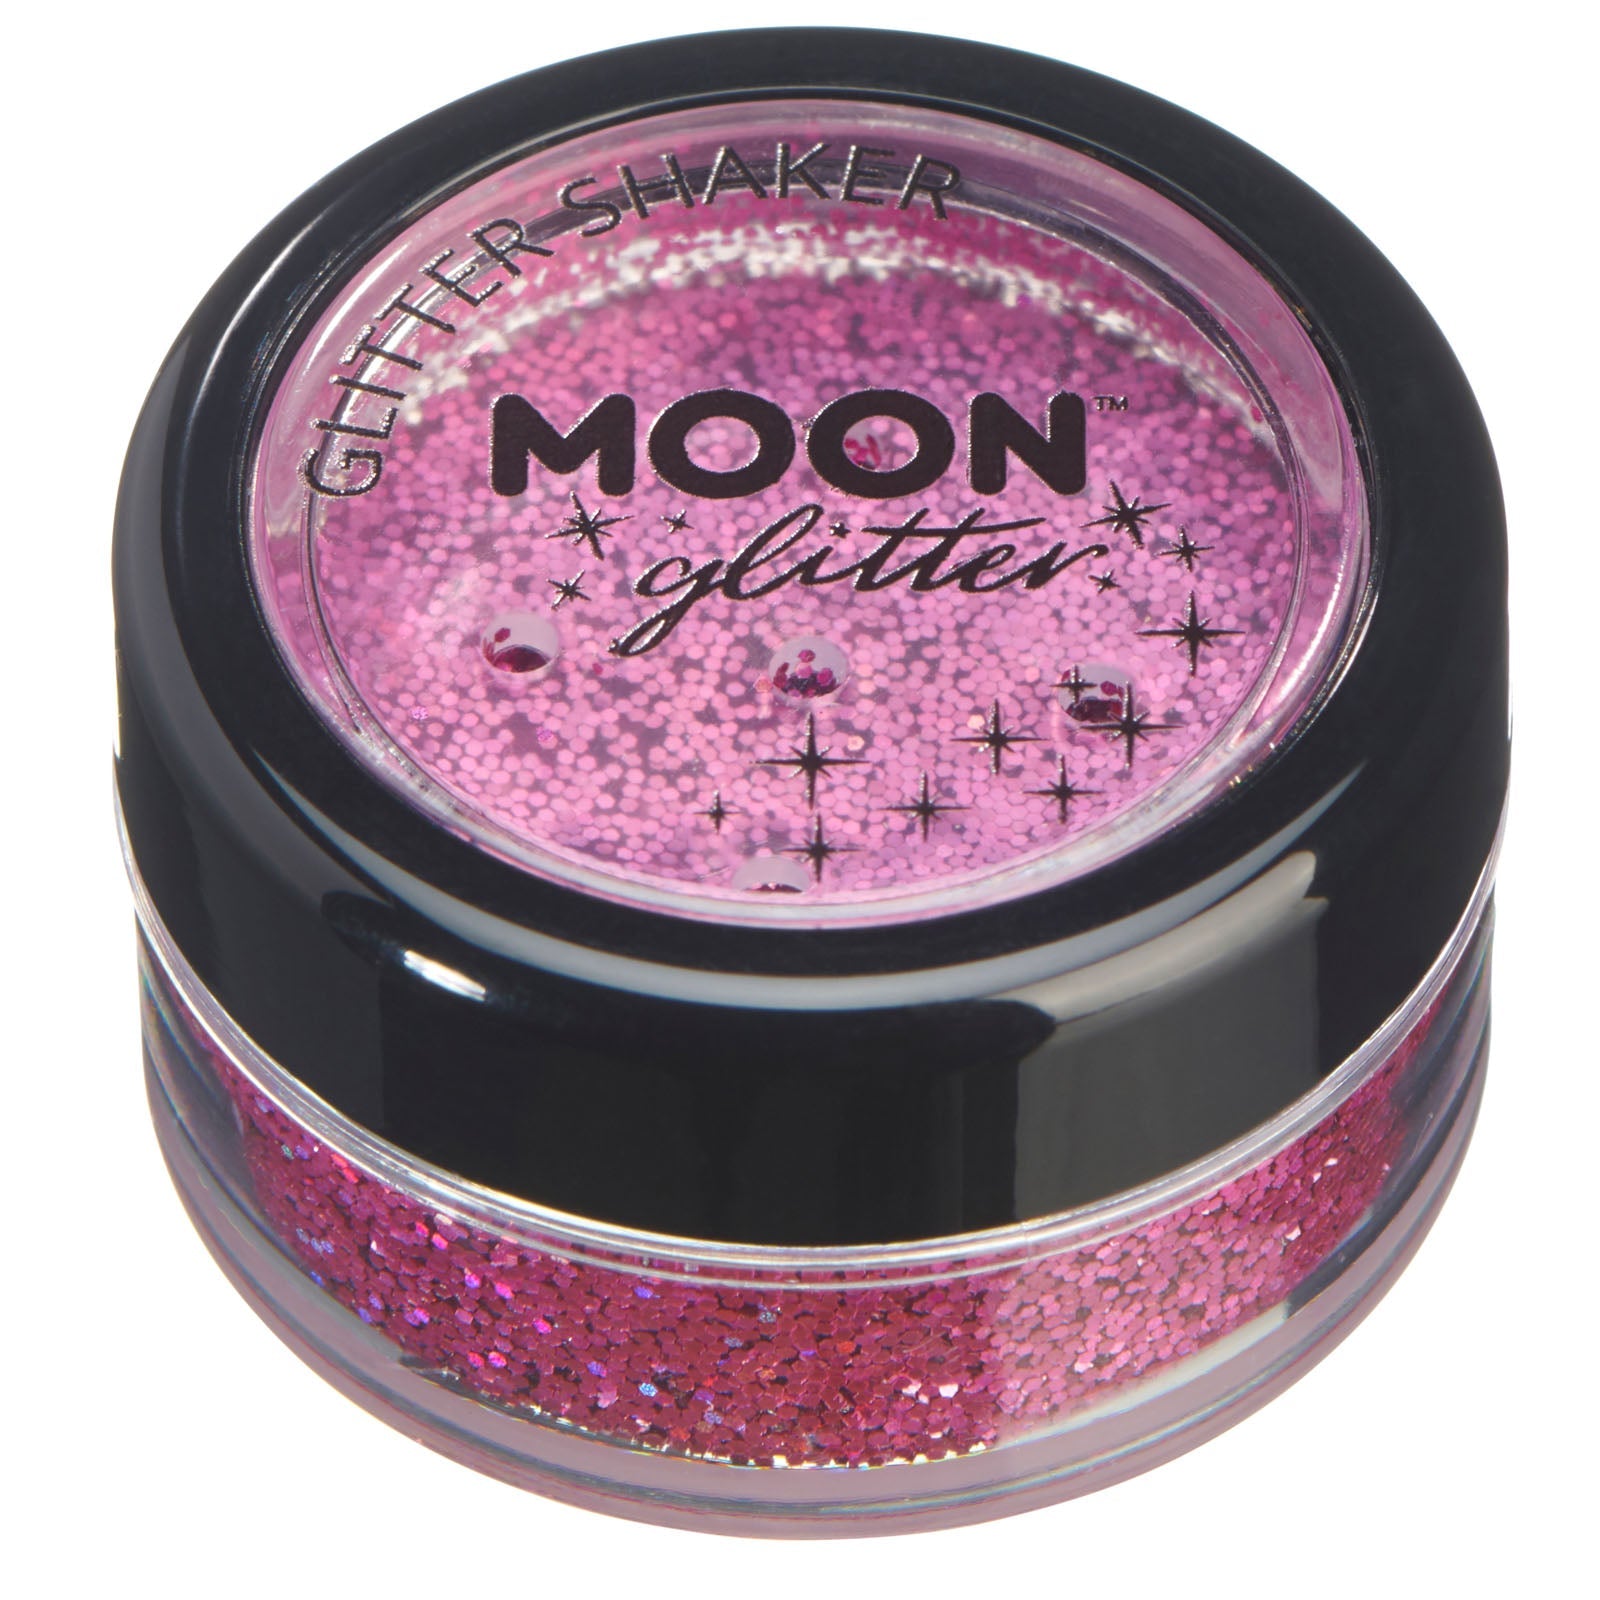 Pink - Holographic Fine Face & Body Glitter Shaker, 5g. Cosmetically certified, FDA & Health Canada compliant, cruelty free and vegan.